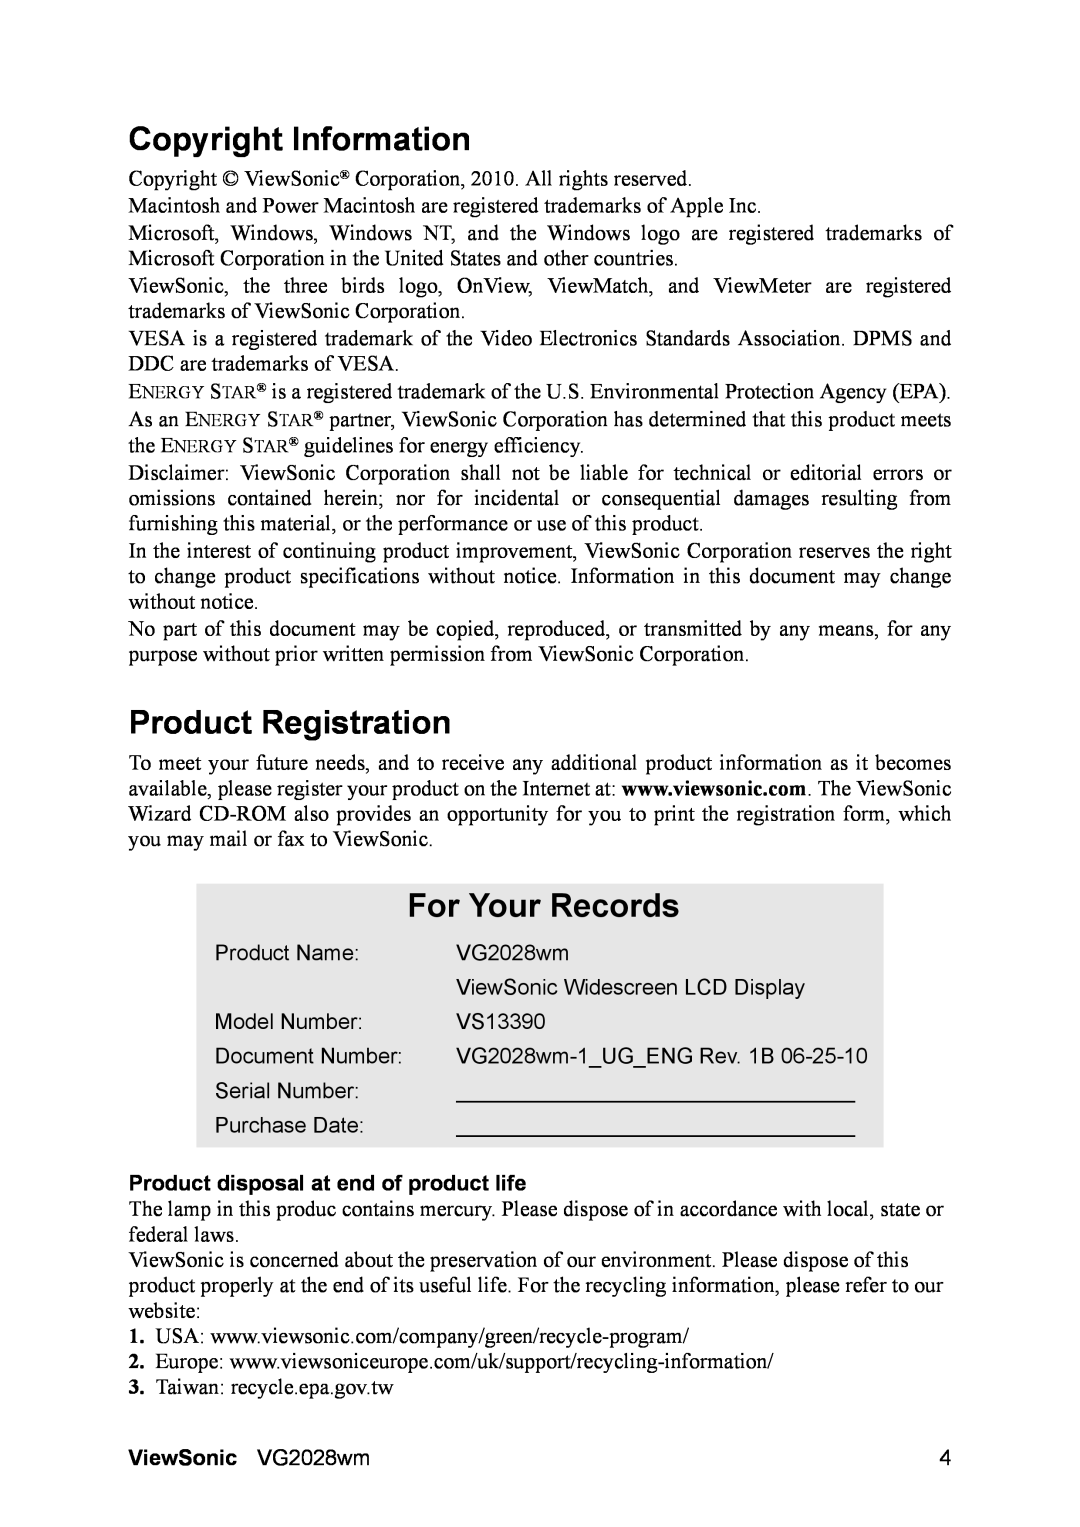 ViewSonic VS13390 Copyright Information, Product Registration, For Your Records, Product disposal at end of product life 